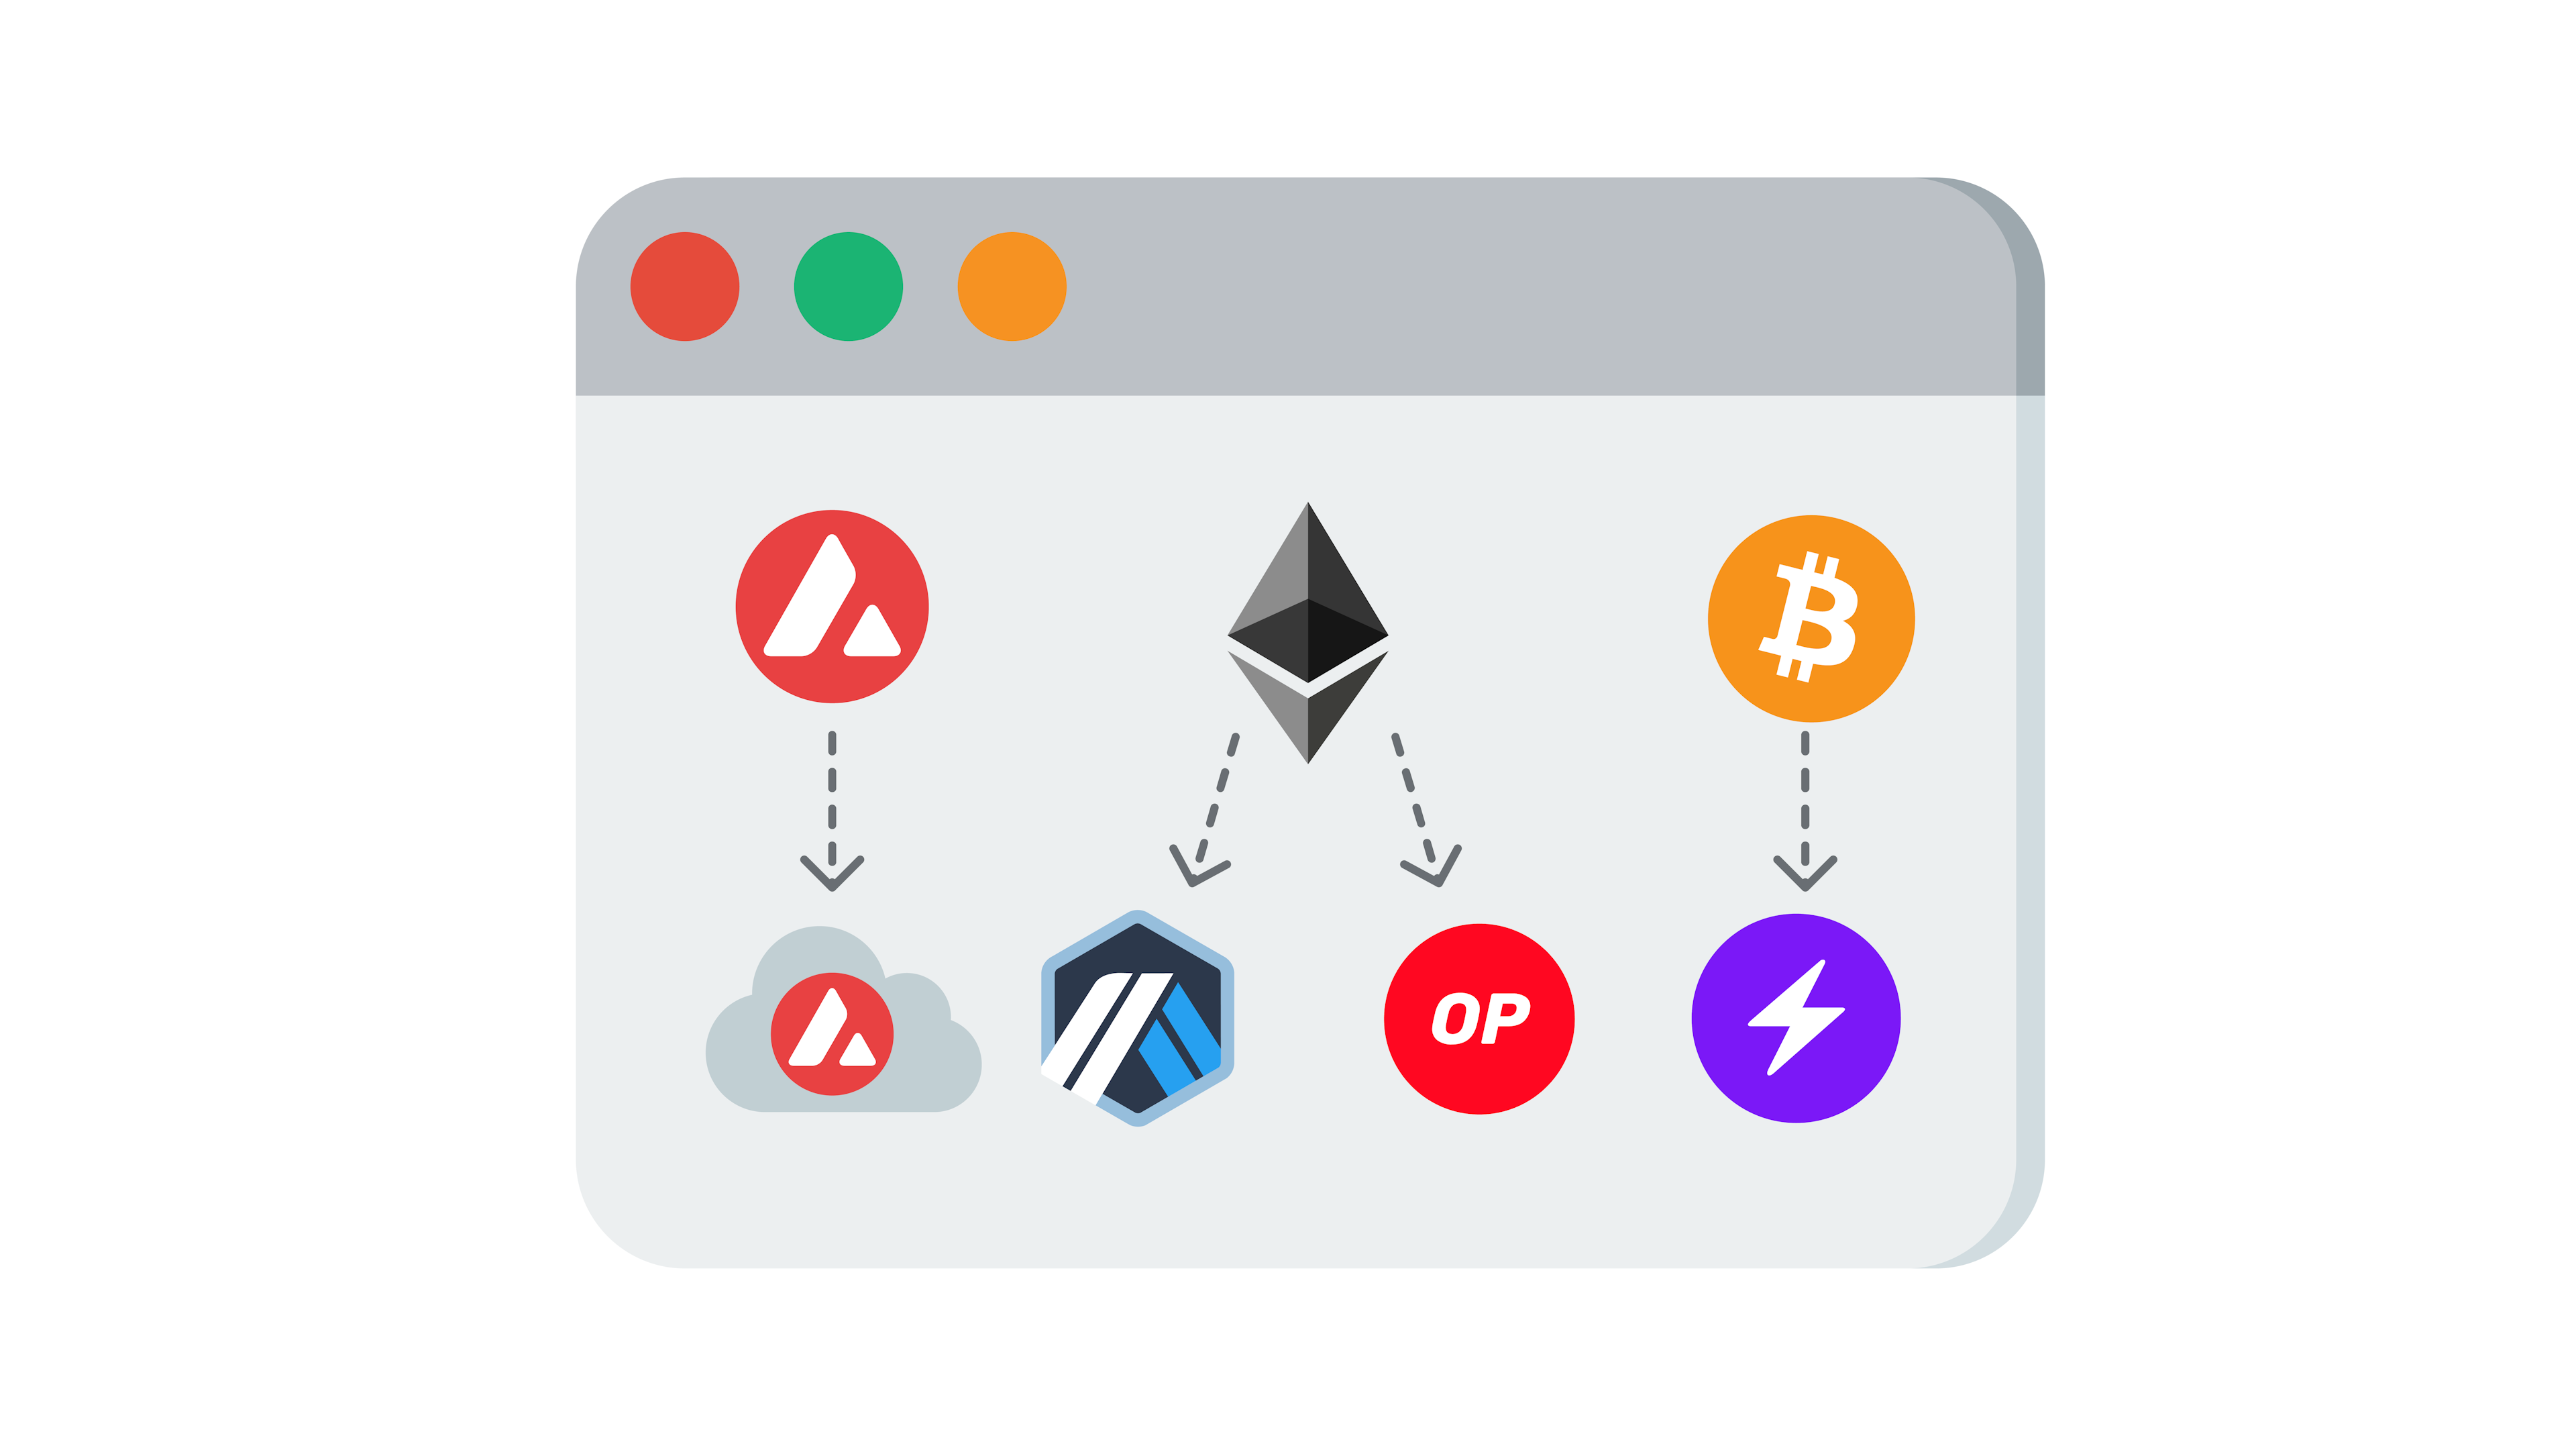 Bitcoin and Ethereum scale via L2s, Avalanche scales via Subnets